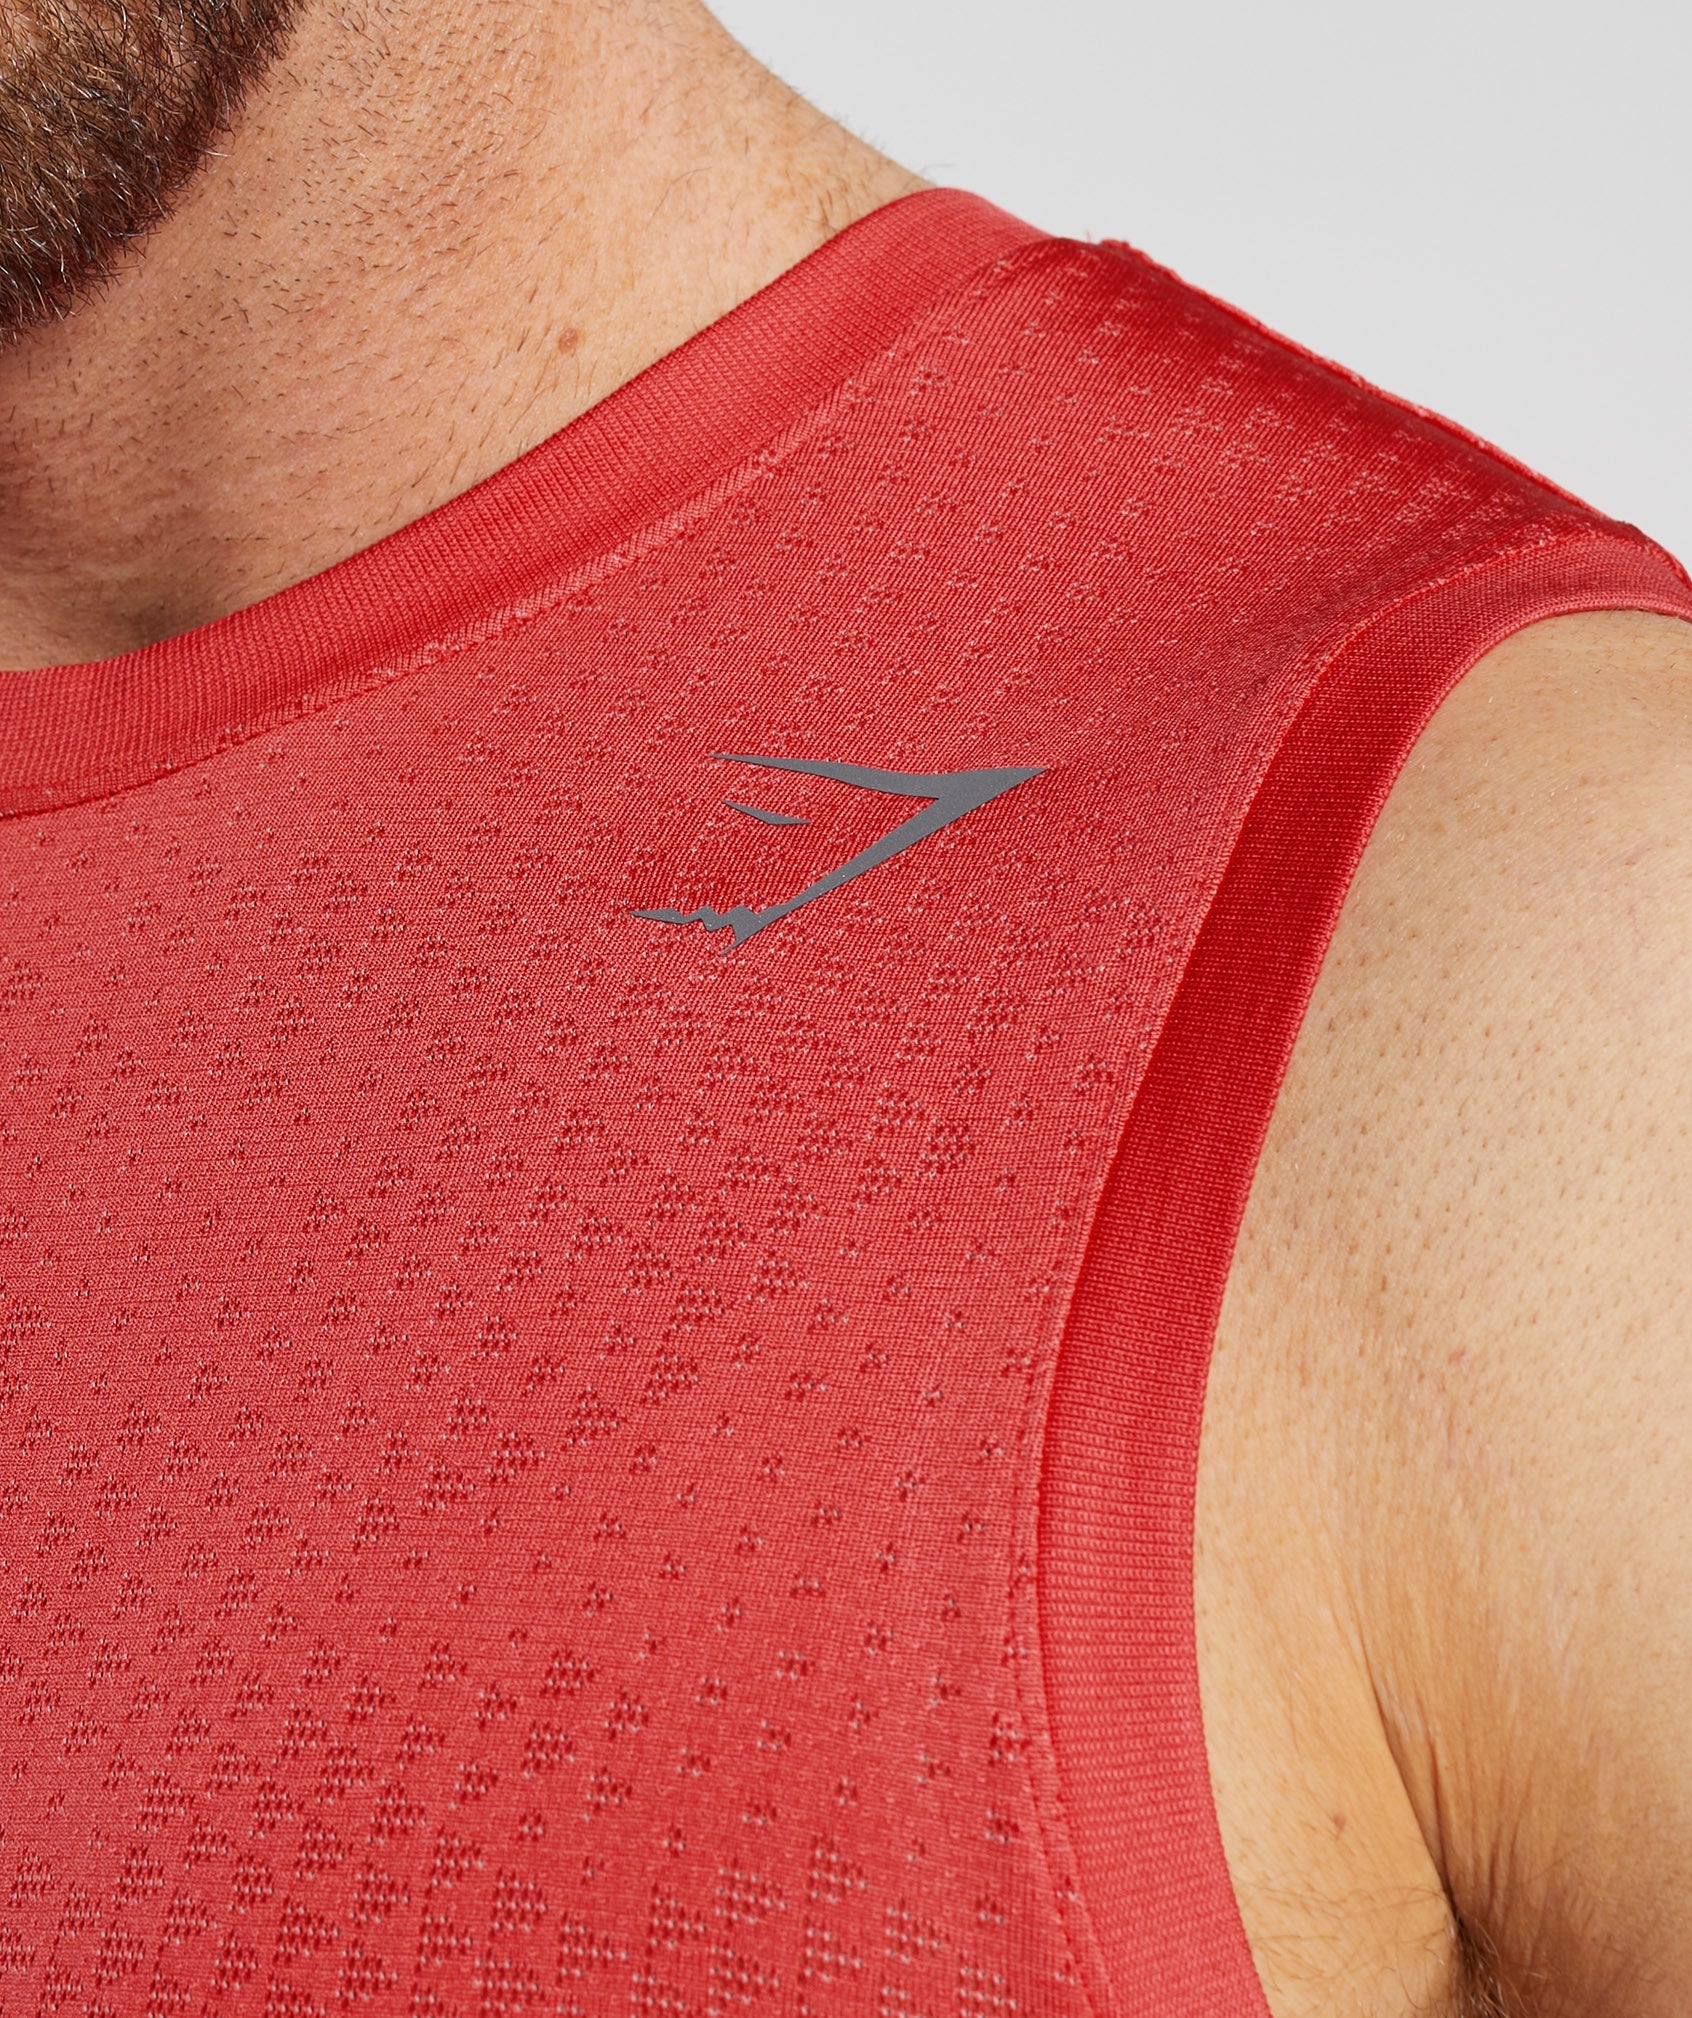 Sport Seamless Tank in Parrot Red/Rhubarb Red